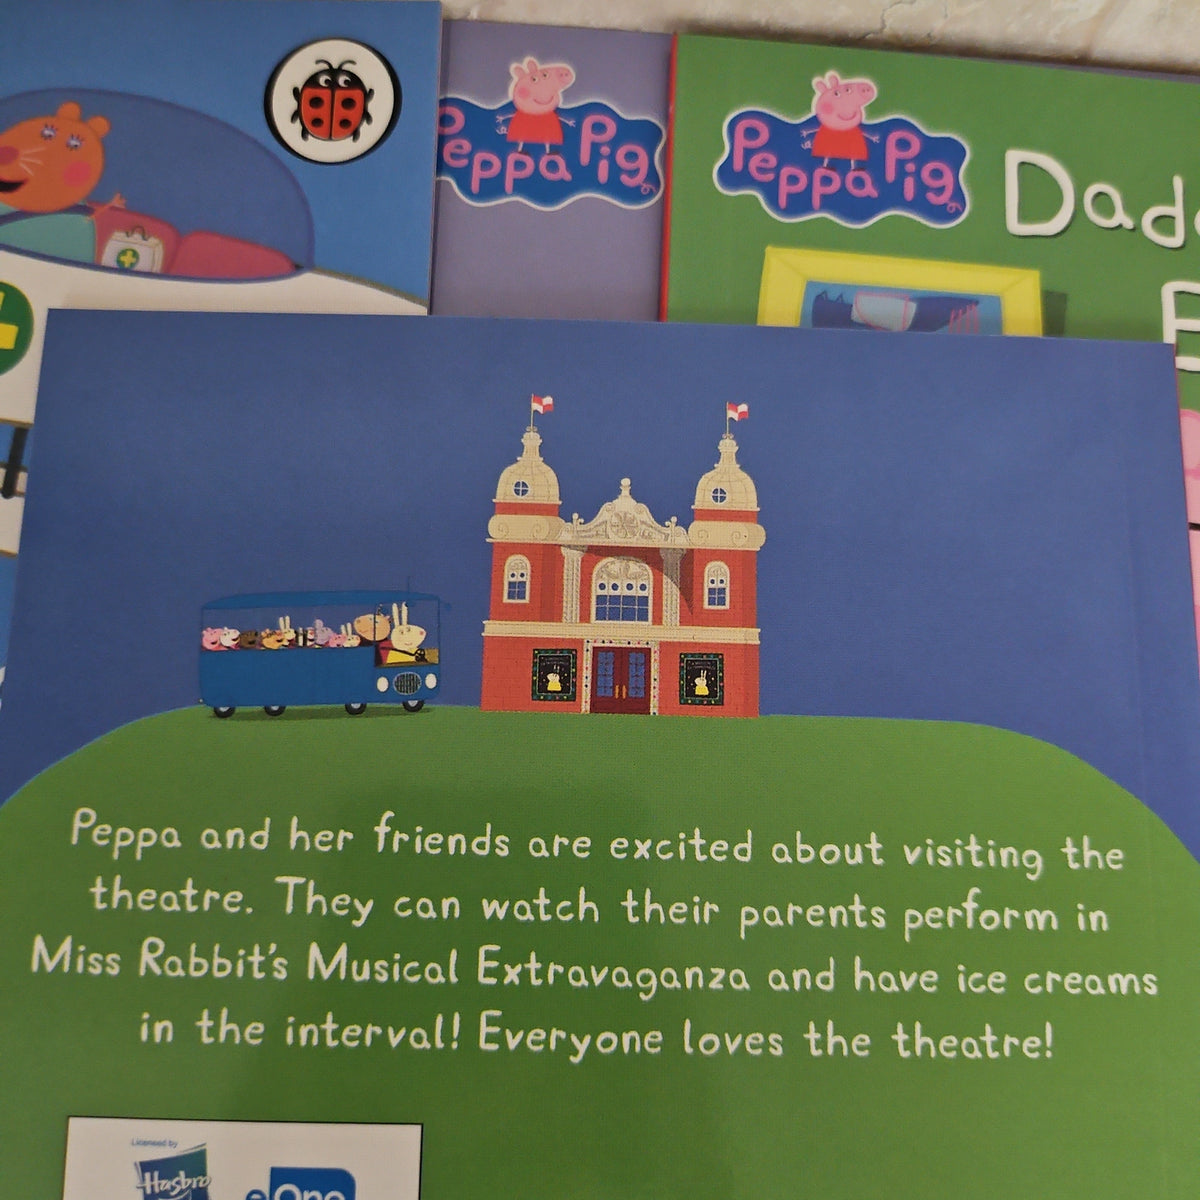 The Amazing Peppa Pig Collection:Peppa’s Theatre Trip